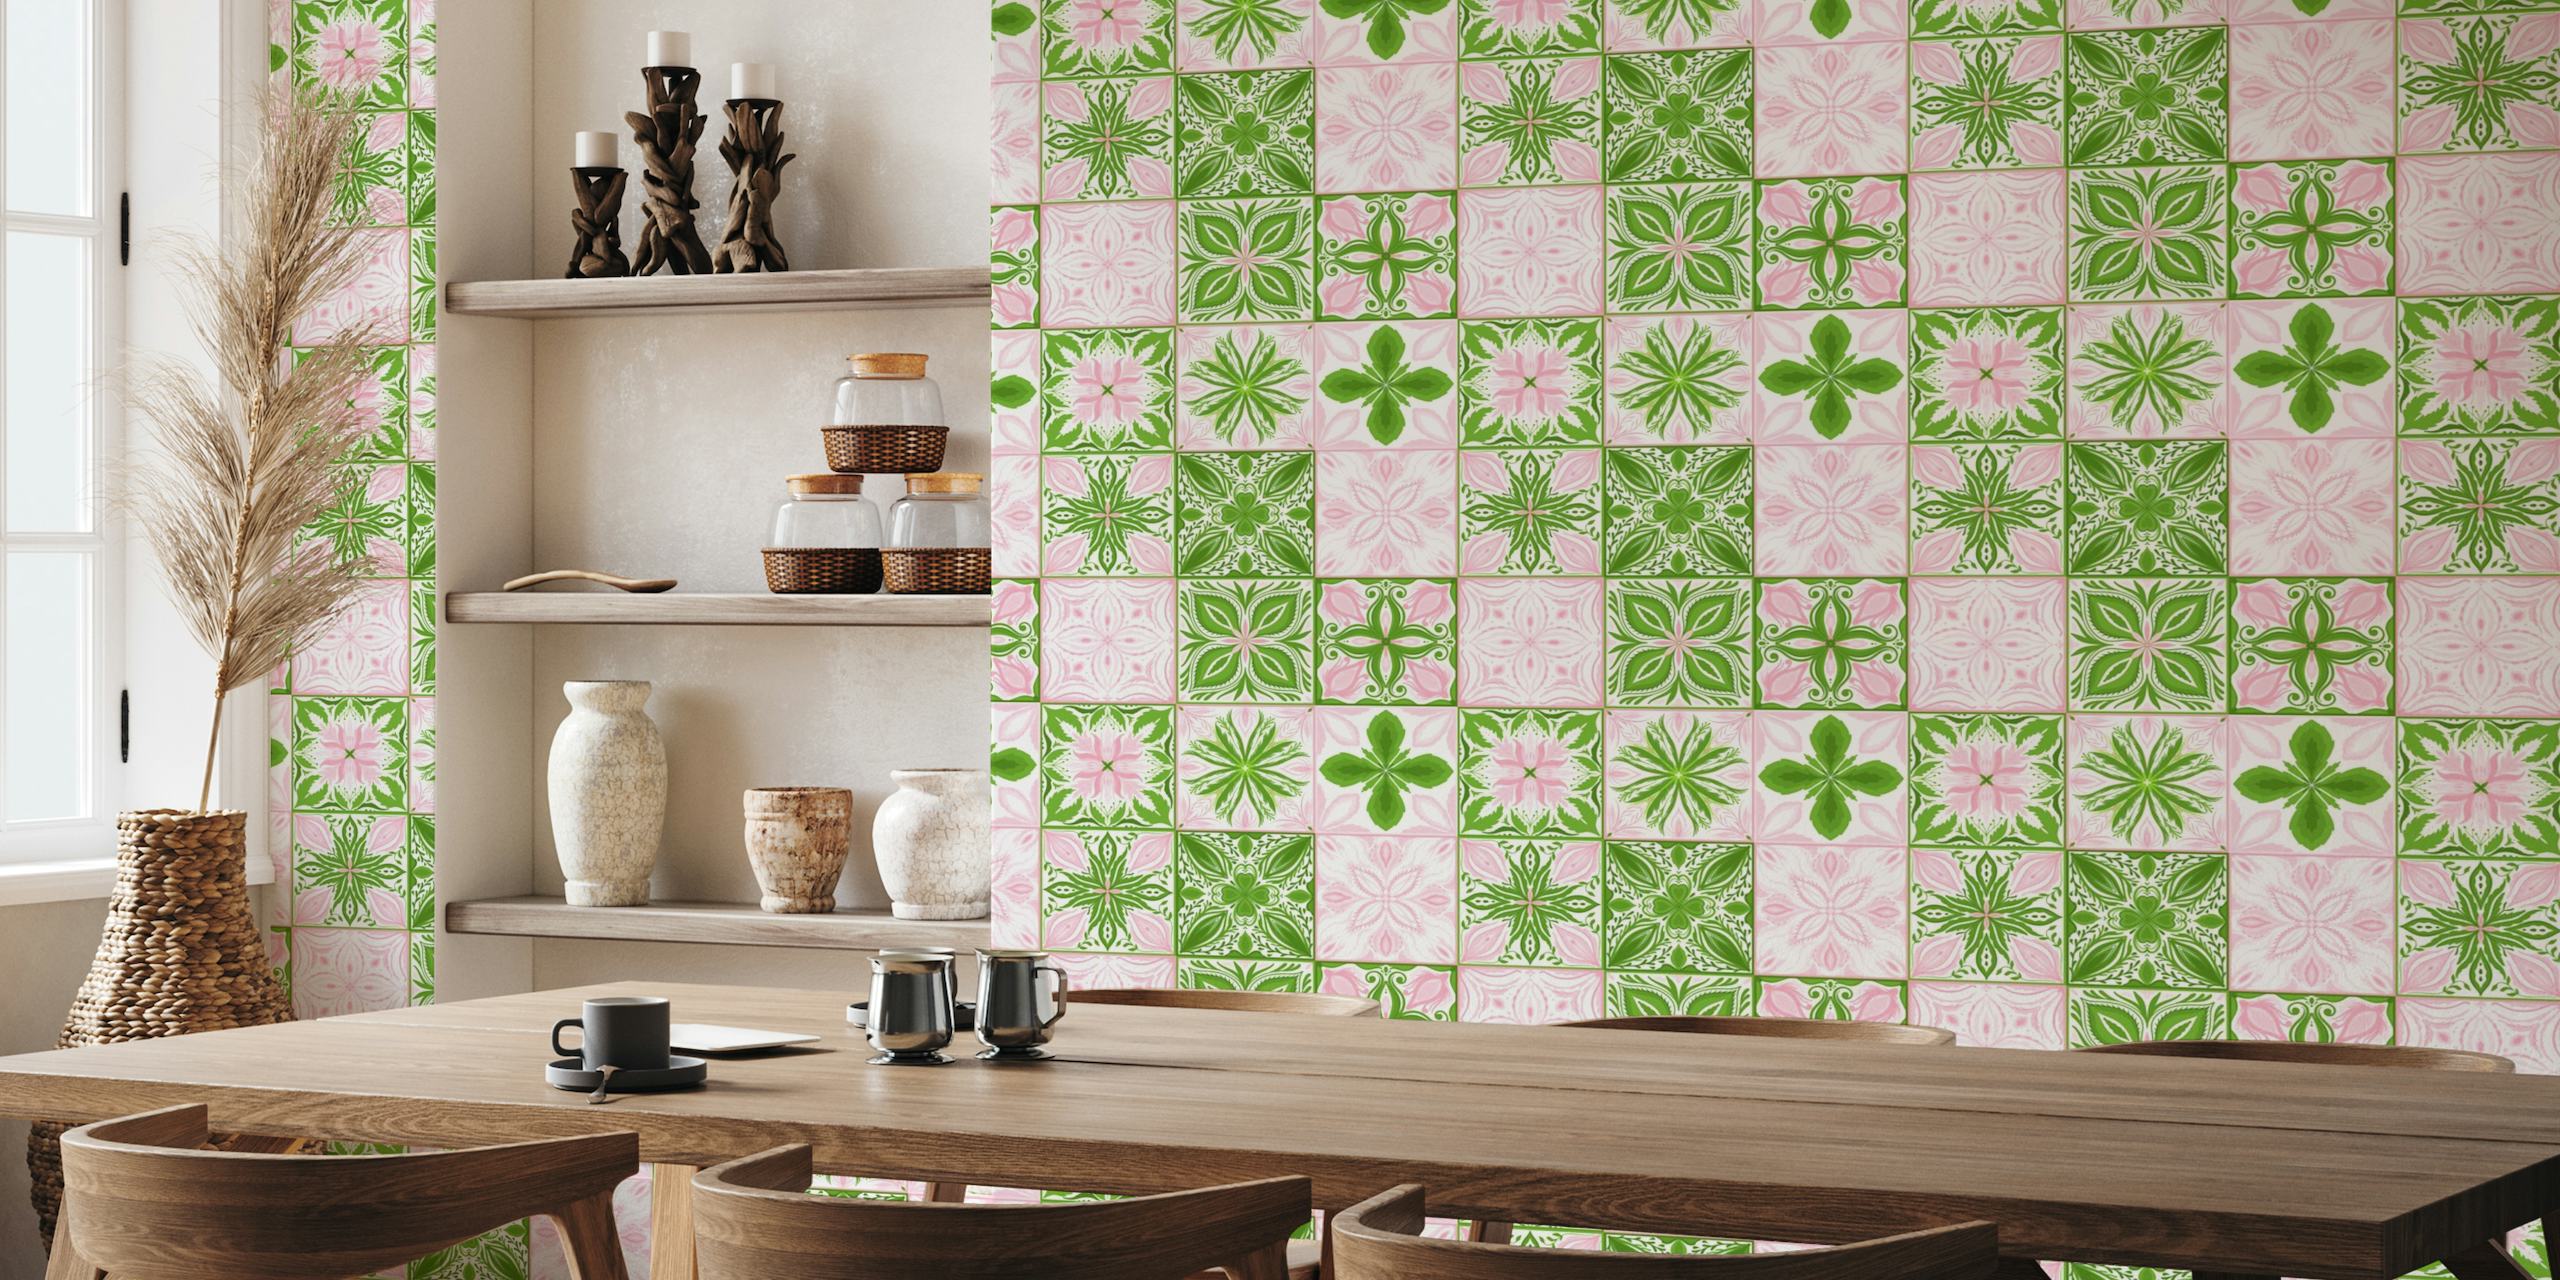 Ornate tiles in pink and green tapete